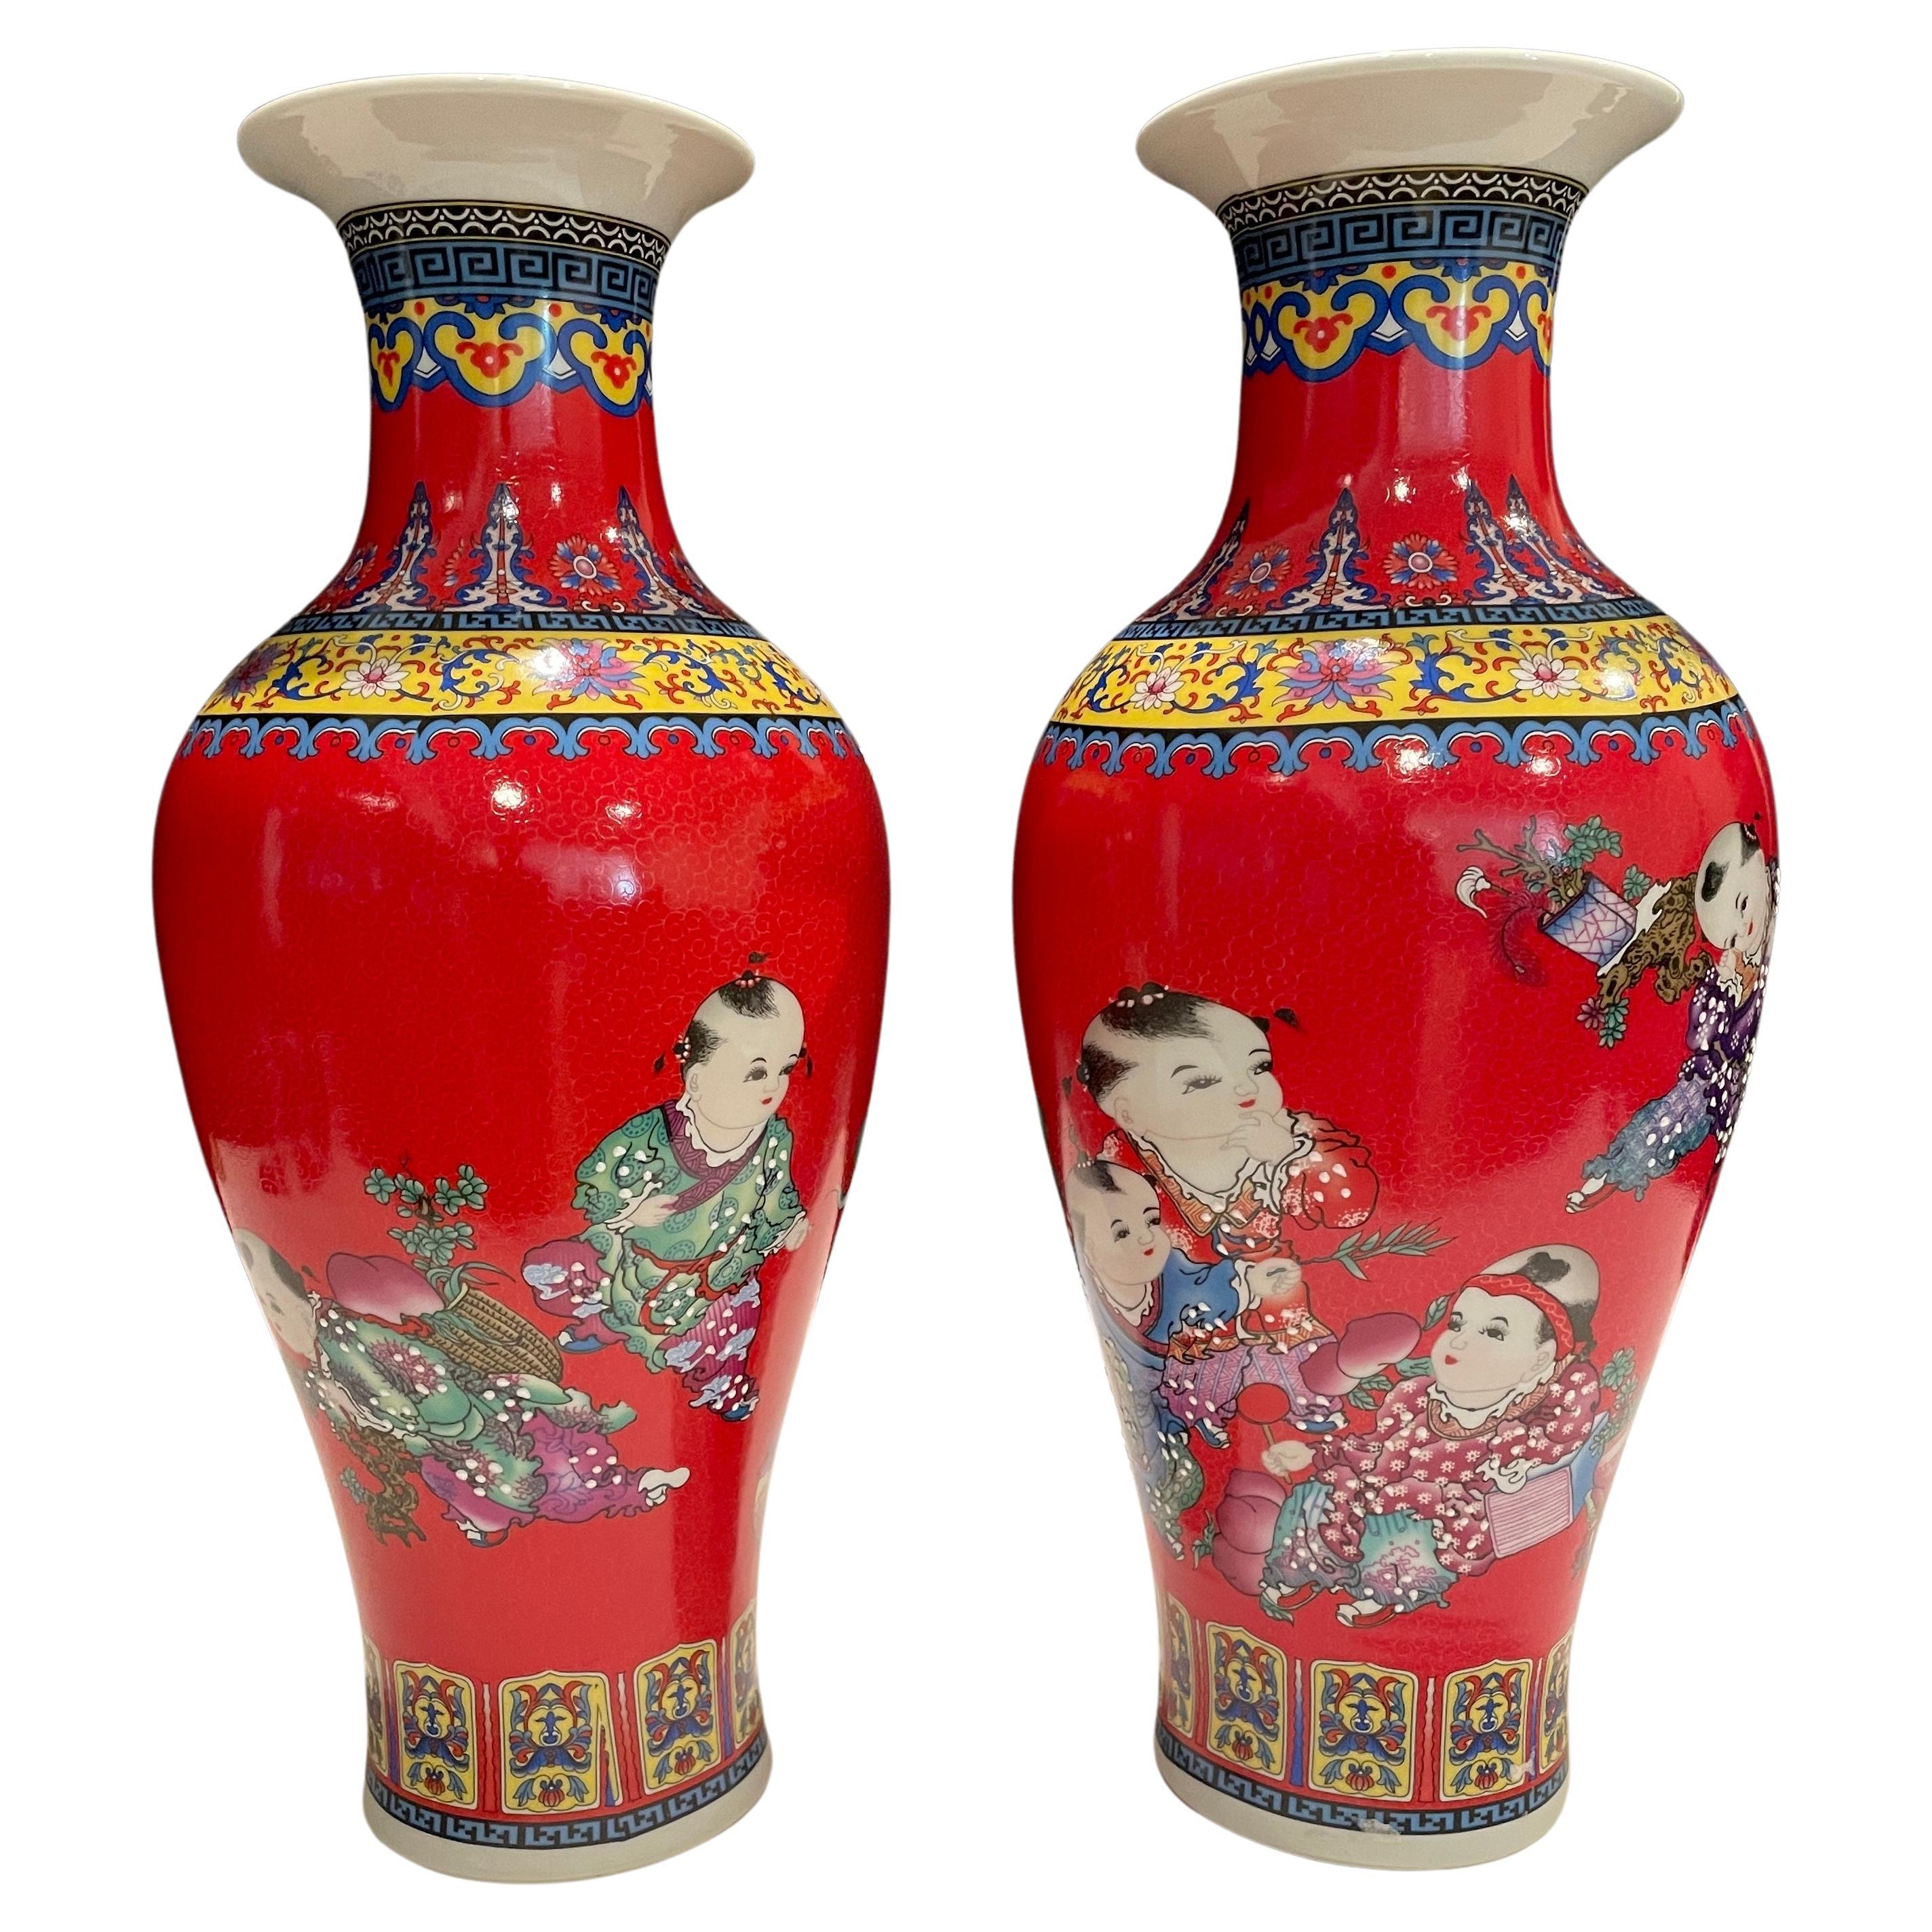 Pair of Chinese Porcelain Vases With Children